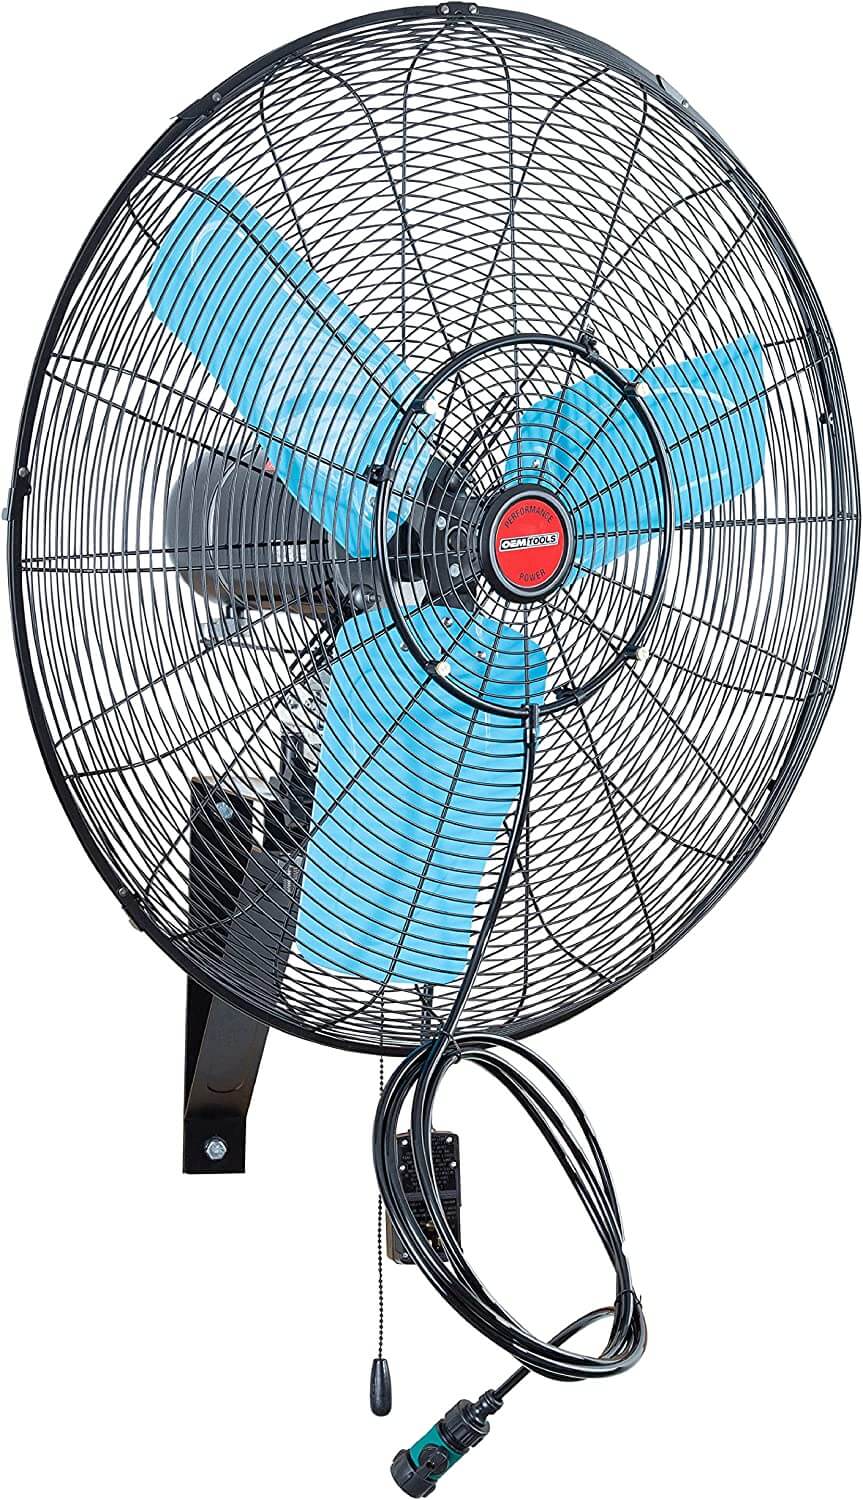 OEMTOOLS 23980 24-inch Oscillating Wall-Mount Misting Fan